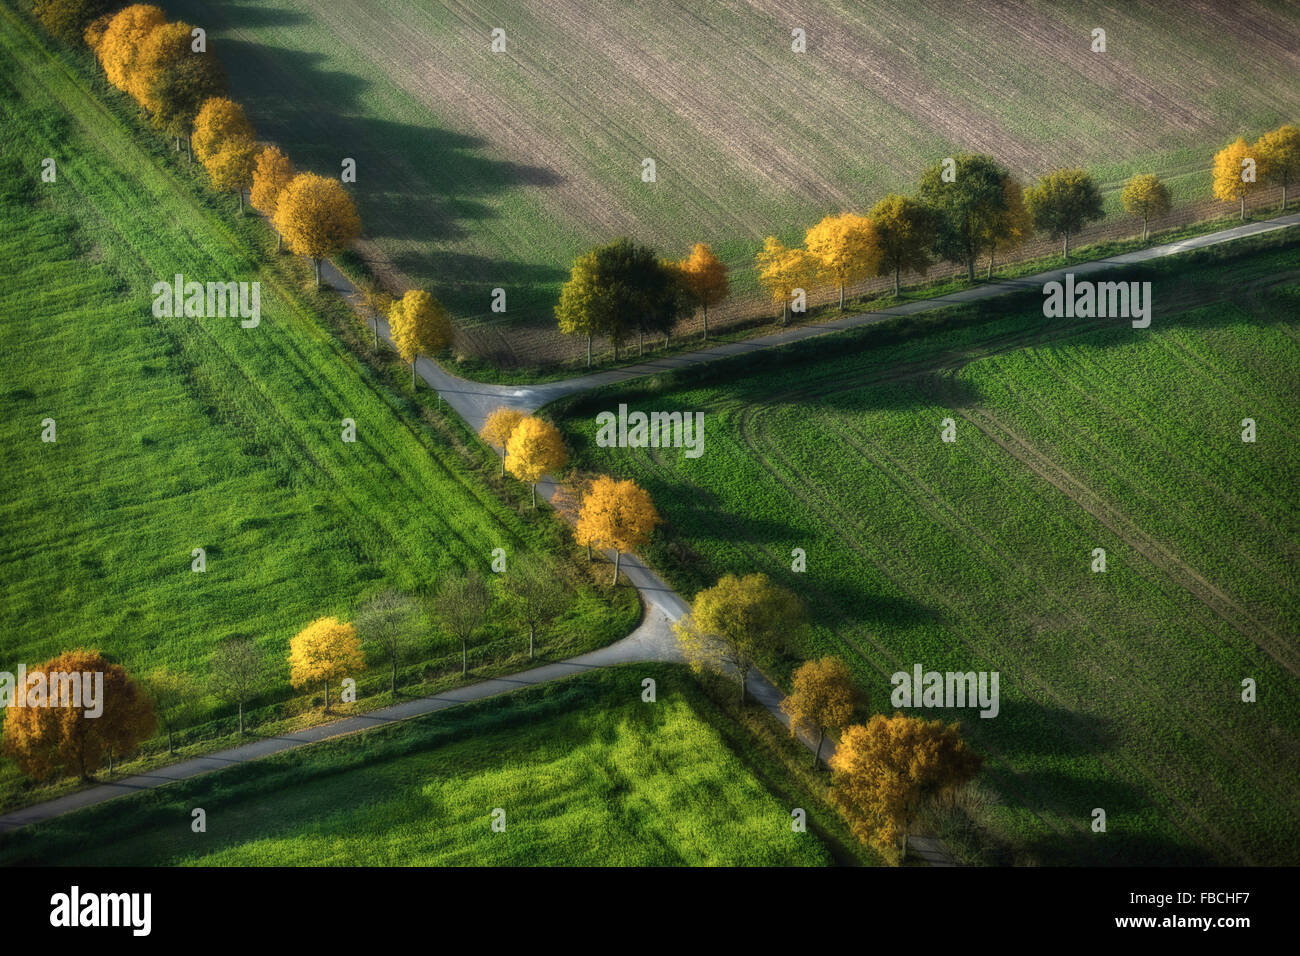 Aerial view, tree-lined avenue, dirt roads, crossroads, double crossover, autumn revival, autumn leaves, agriculture, fields, Stock Photo